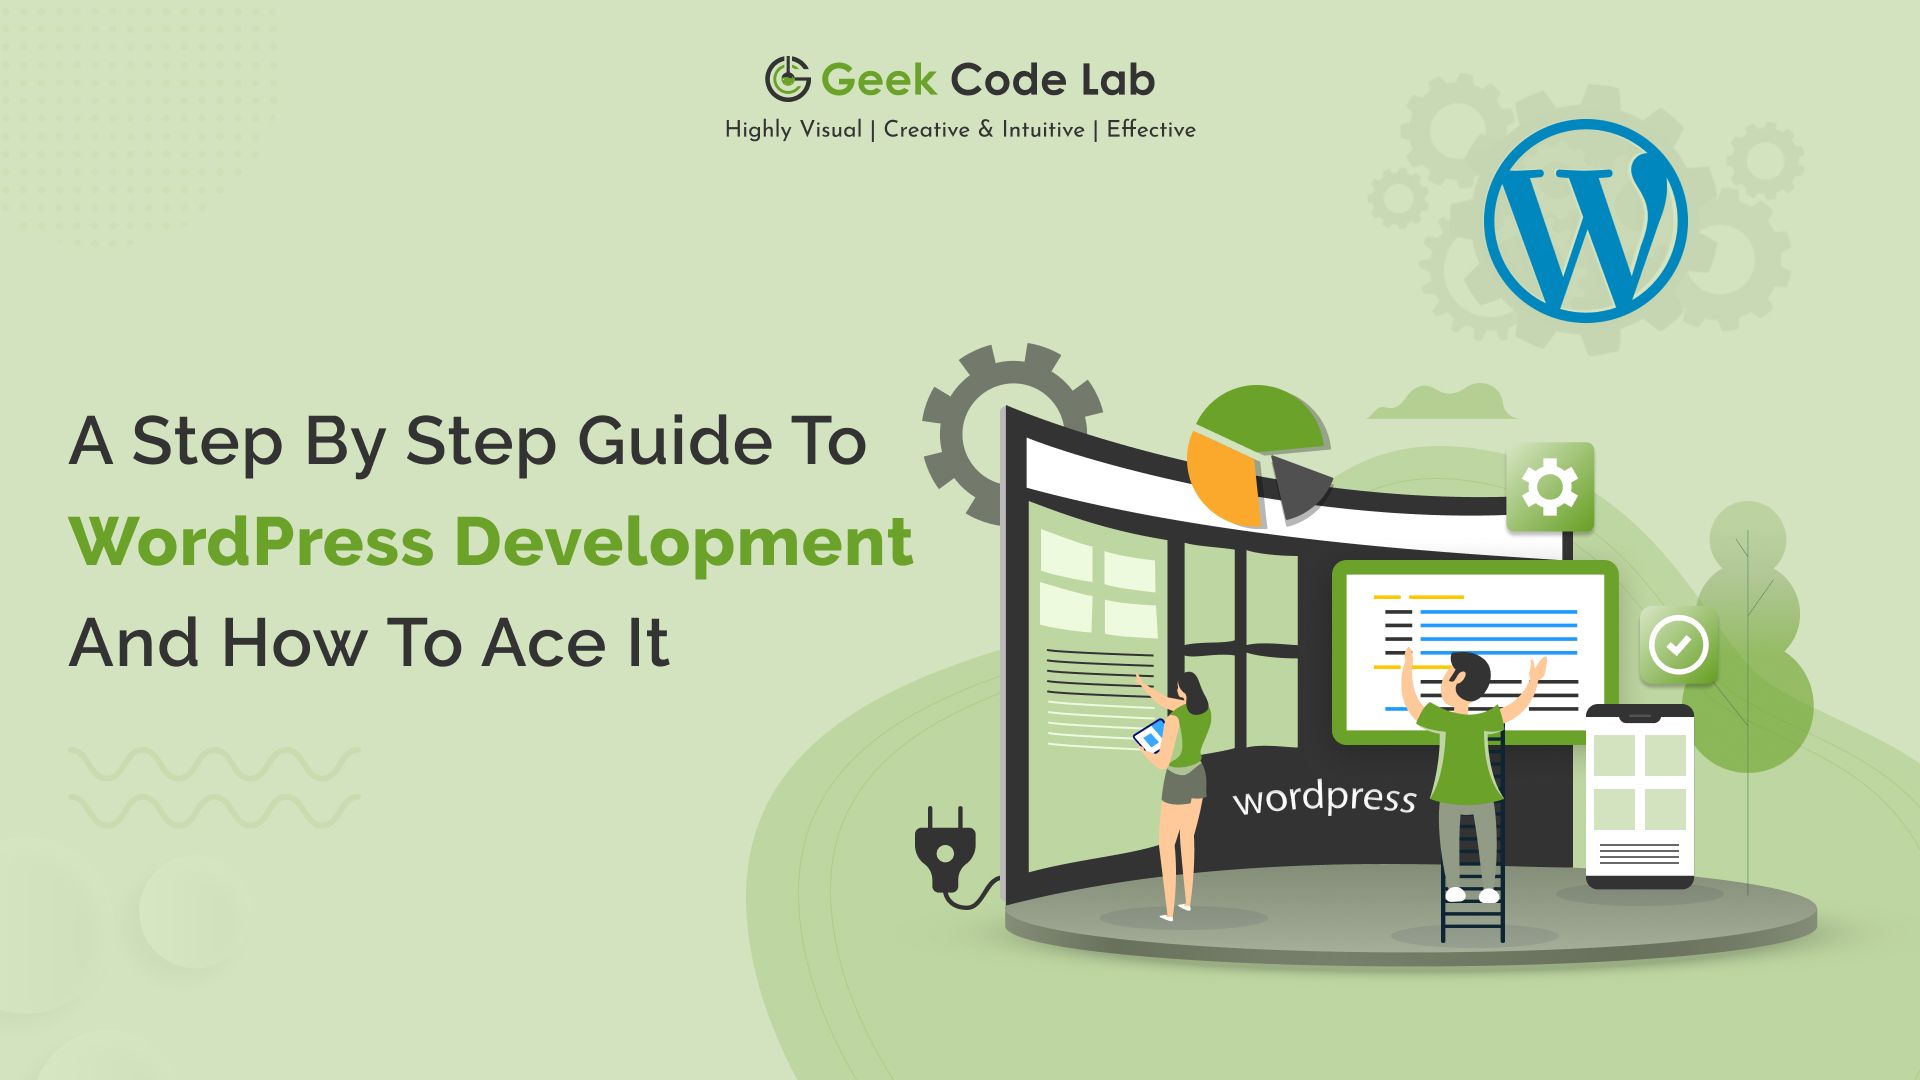 A step-by-step guide to WordPress Development and How to Ace it